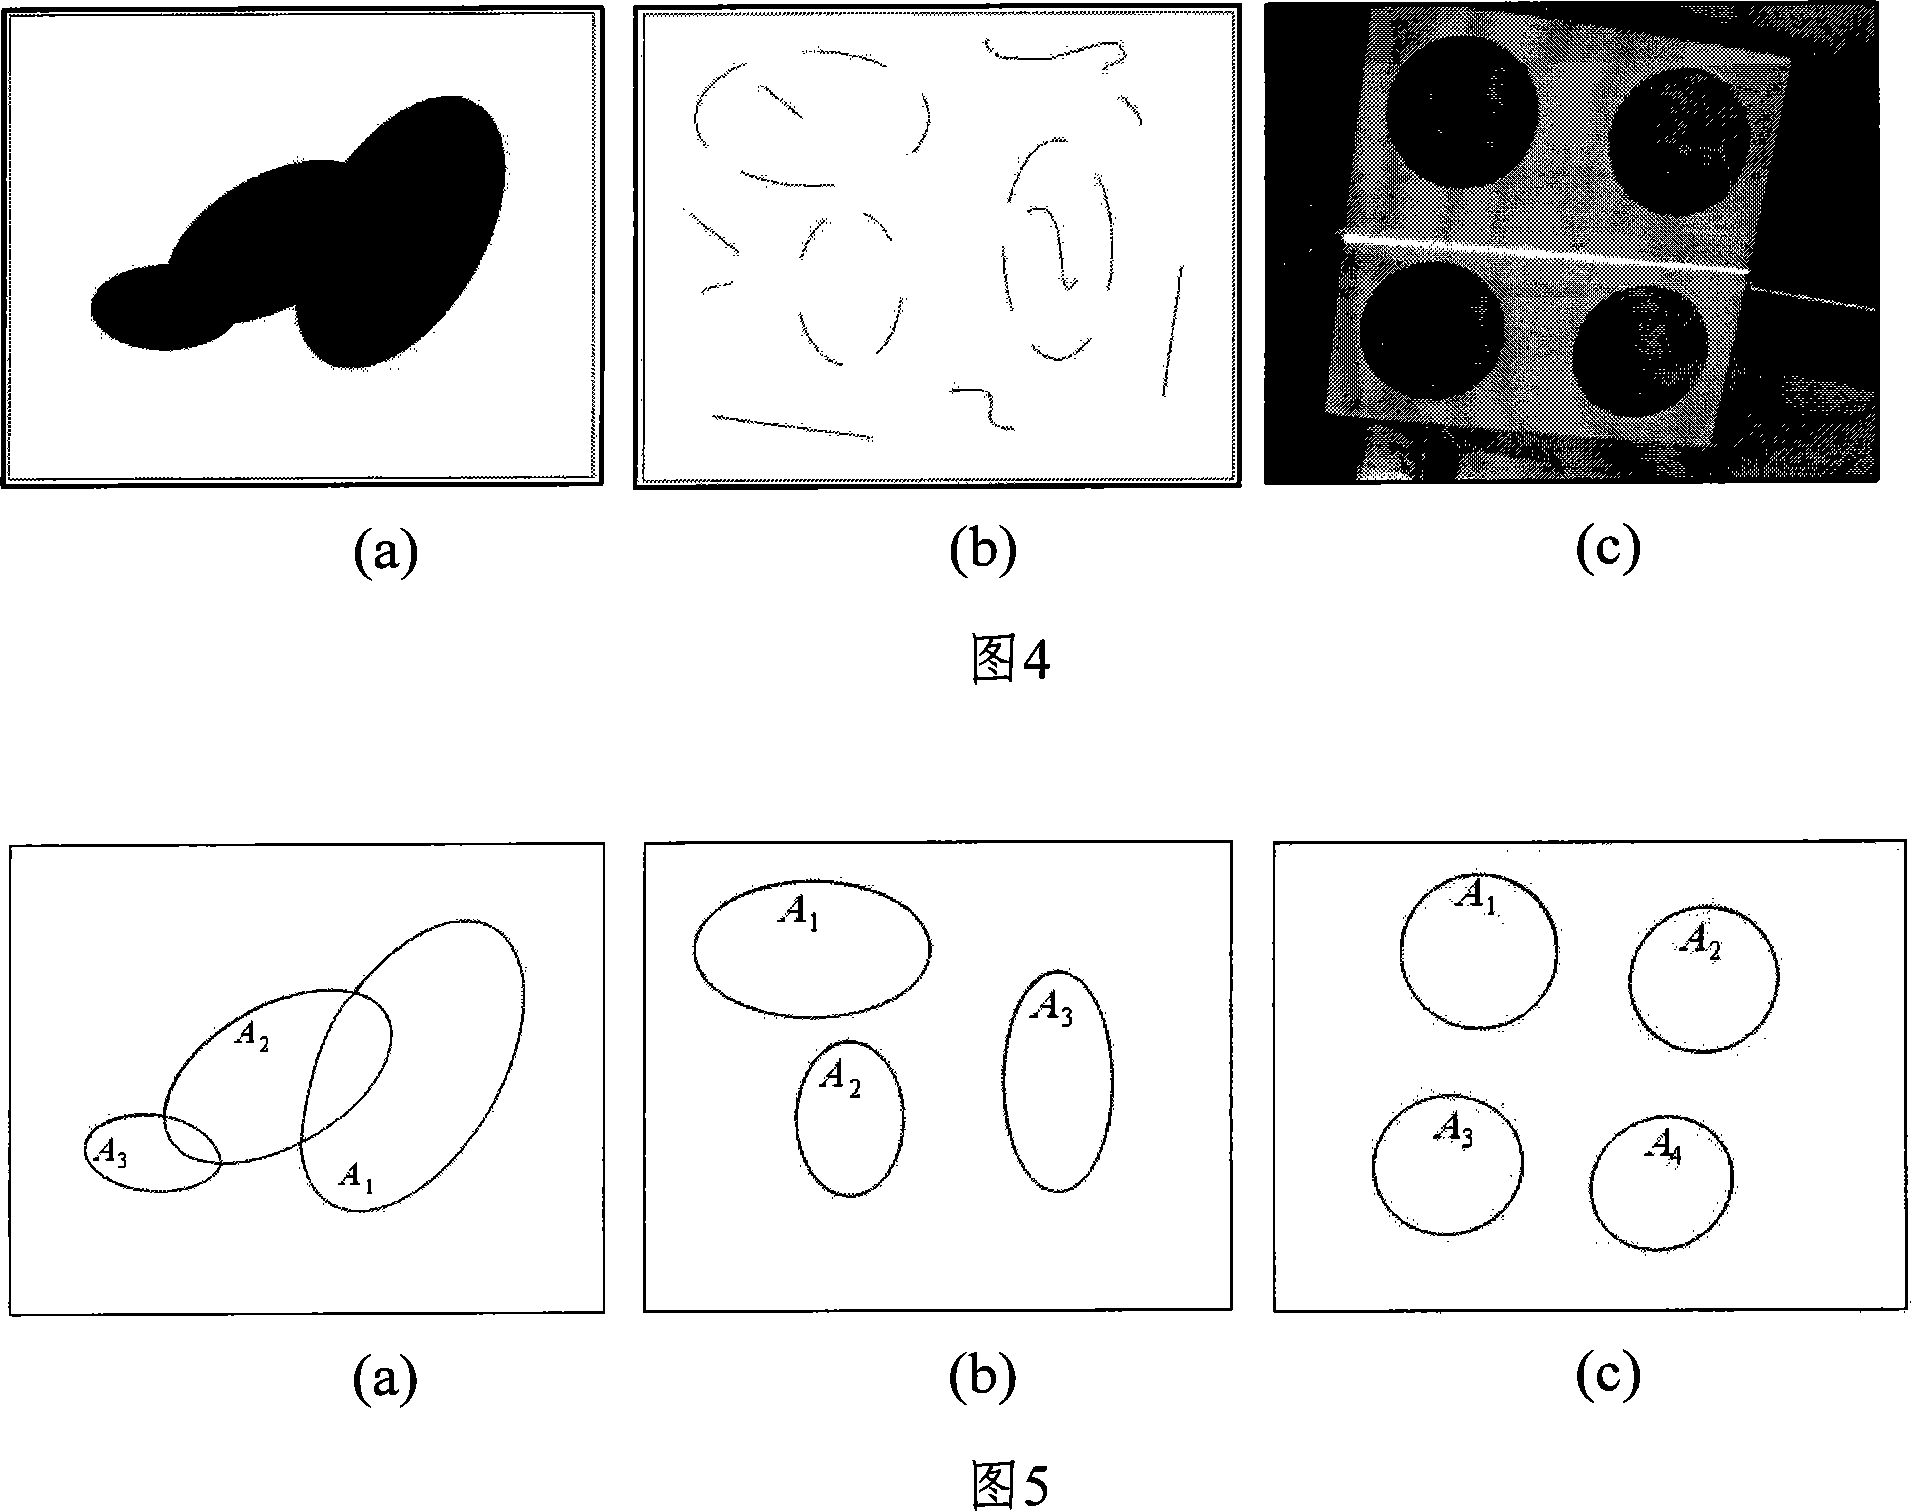 An automatic extracting method for ellipse image features in complex background images